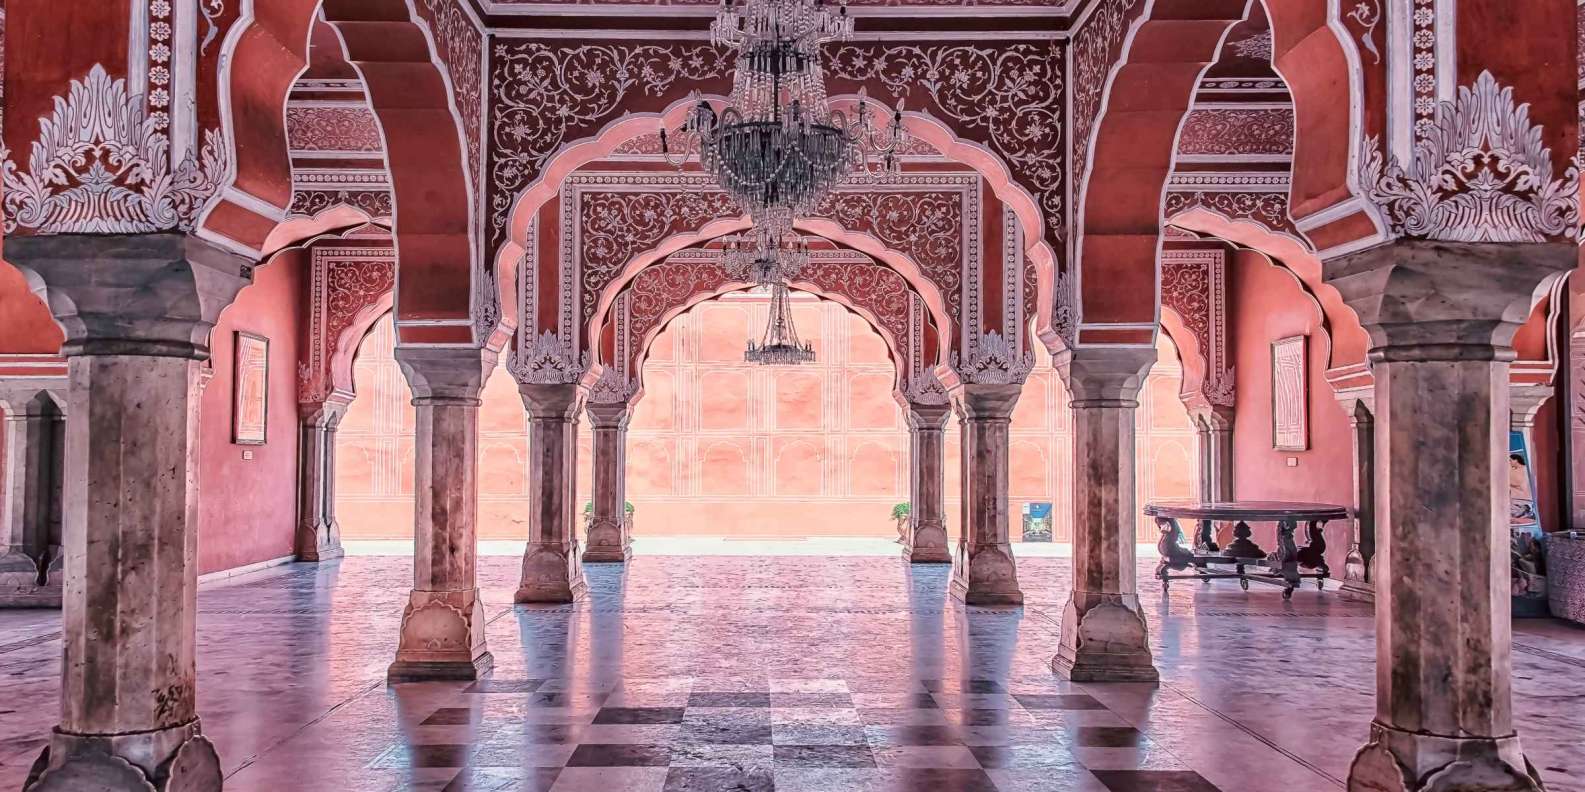 City Palace, Jaipur, Jaipur - Book Tickets & Tours | GetYourGuide